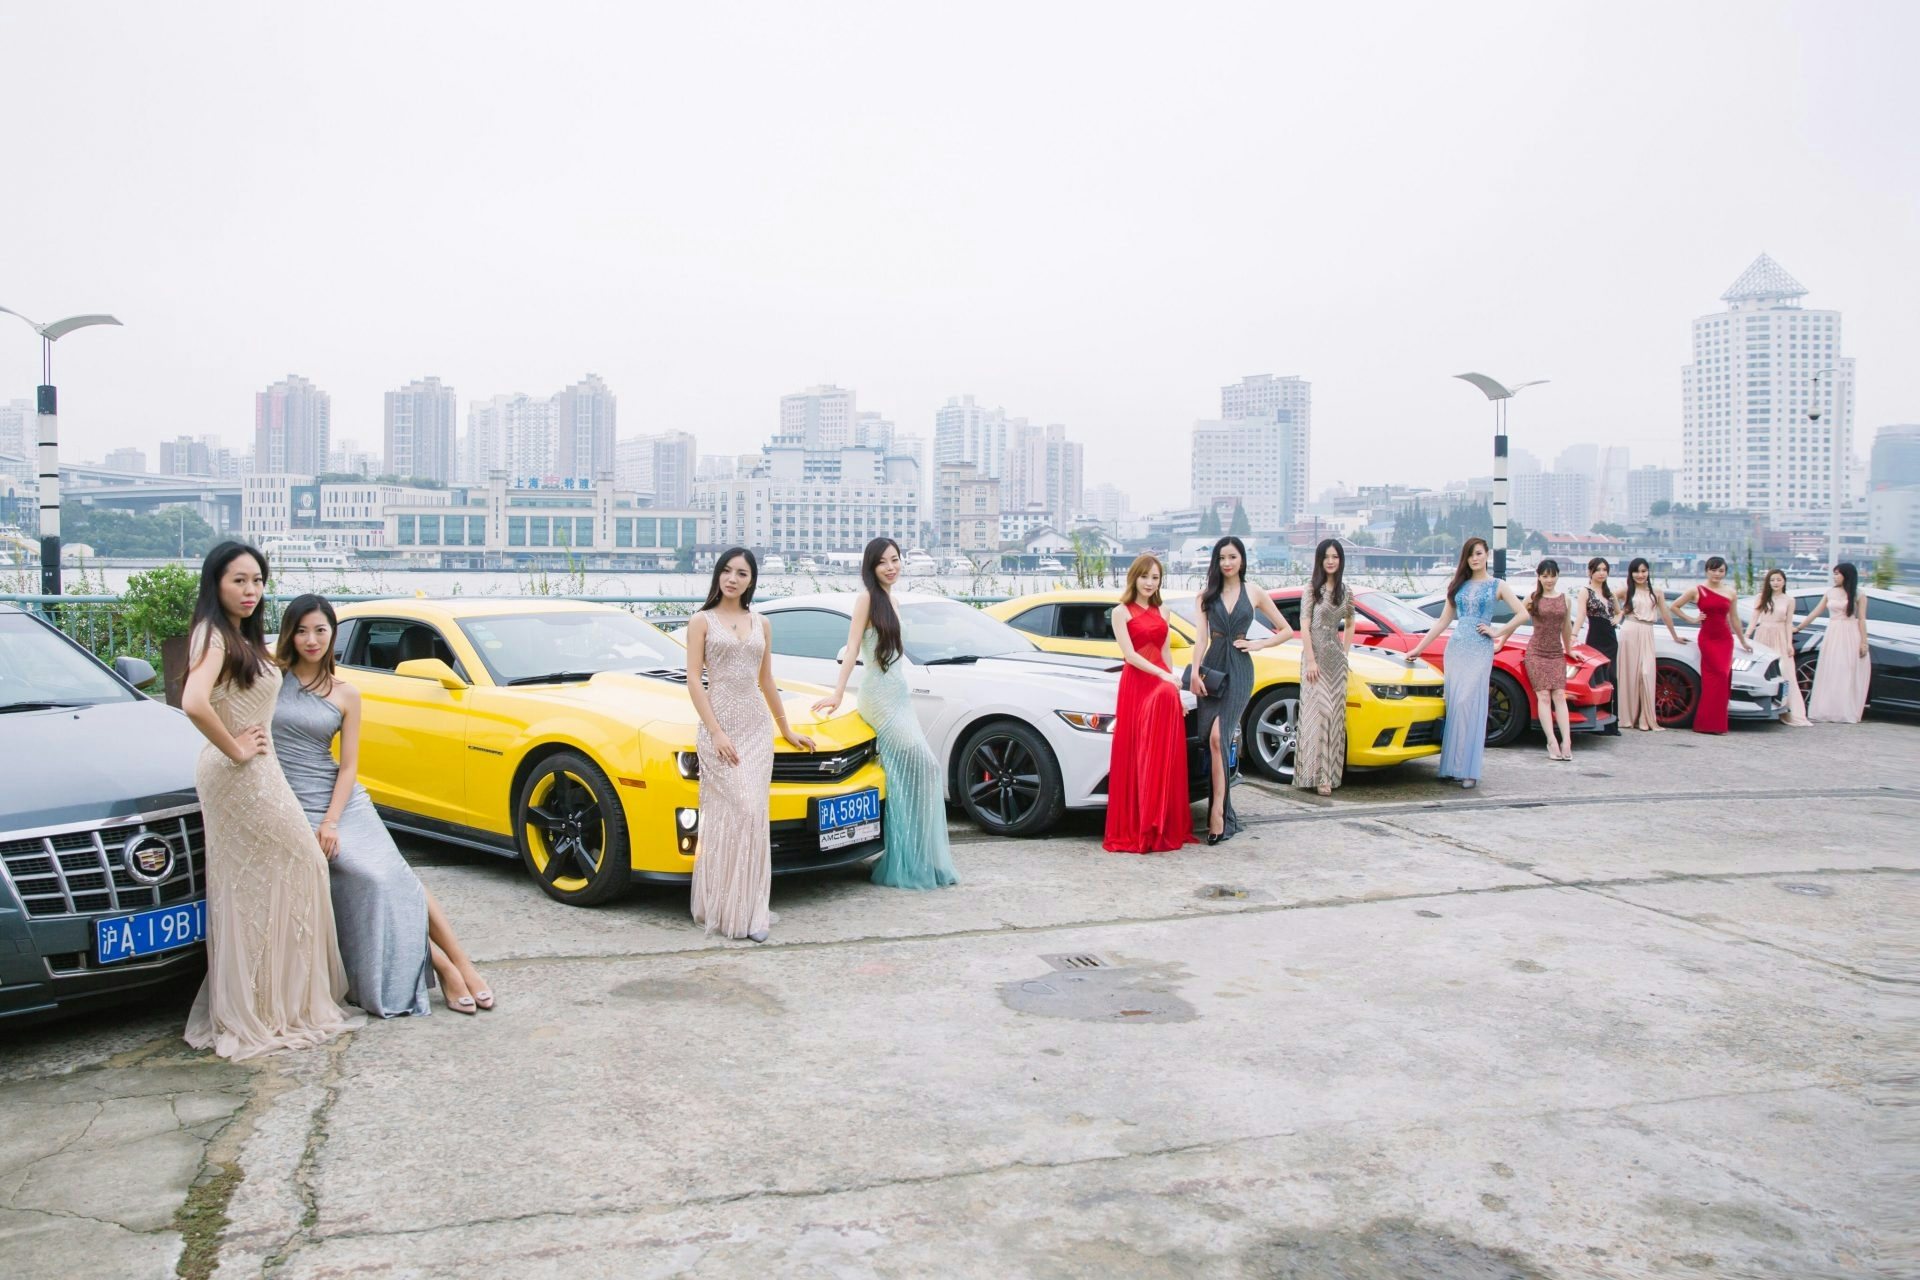 Members of the fan club for, Ayawawa, a well-known author on relationships in China, gather around luxury cars for a Ms Paris event. (Courtesy Photo) 